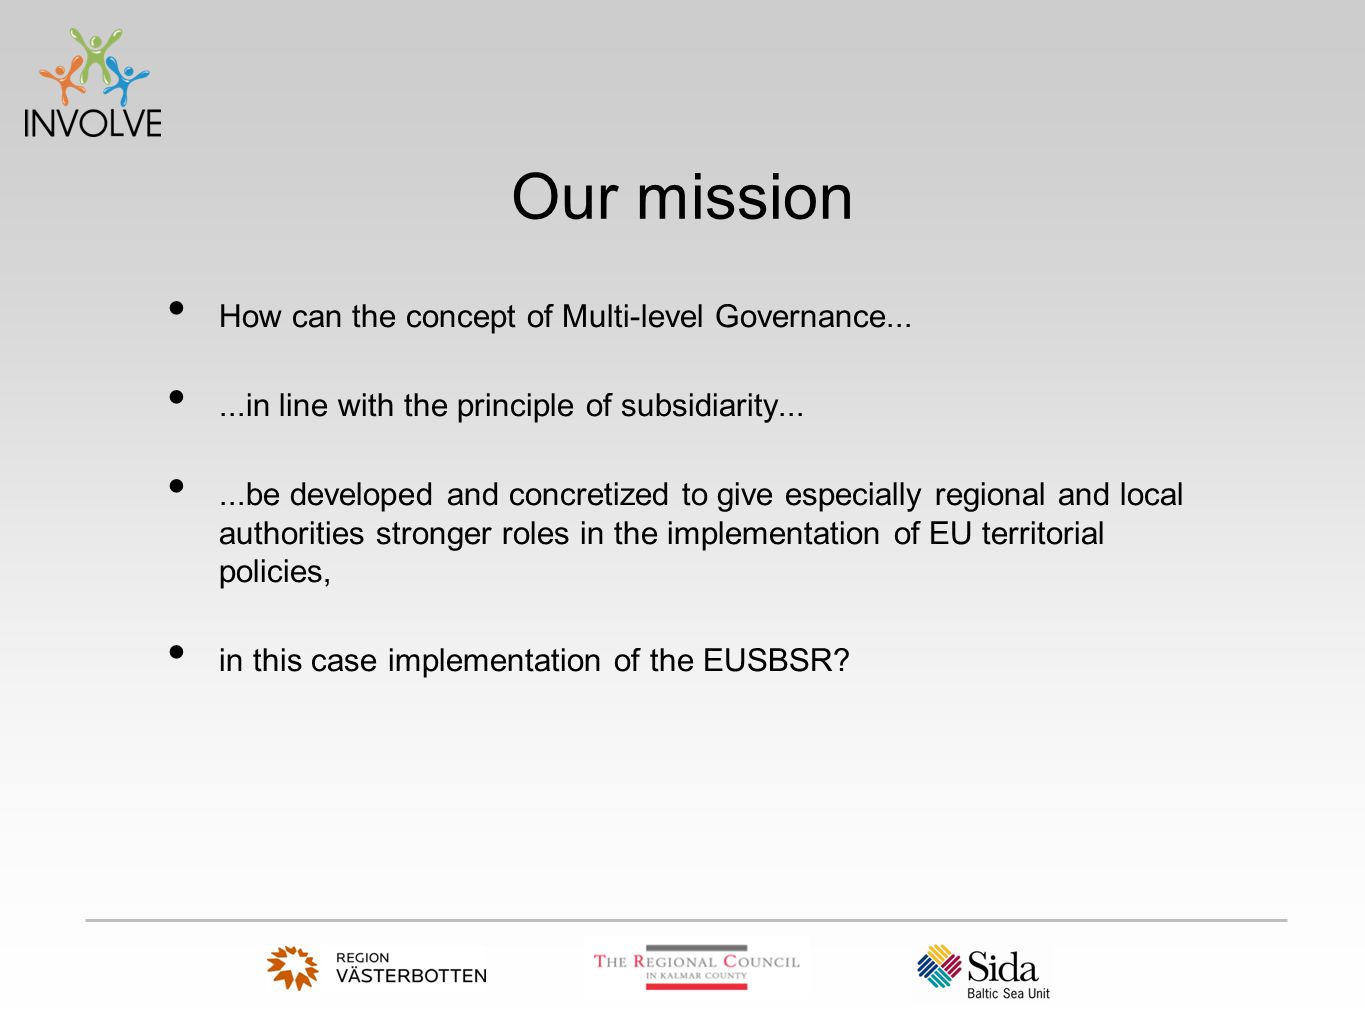 Our mission How can the concept of Multi-level Governance......in line with the principle of subsidiarity......be developed and concretized to give especially regional and local authorities stronger roles in the implementation of EU territorial policies, in this case implementation of the EUSBSR